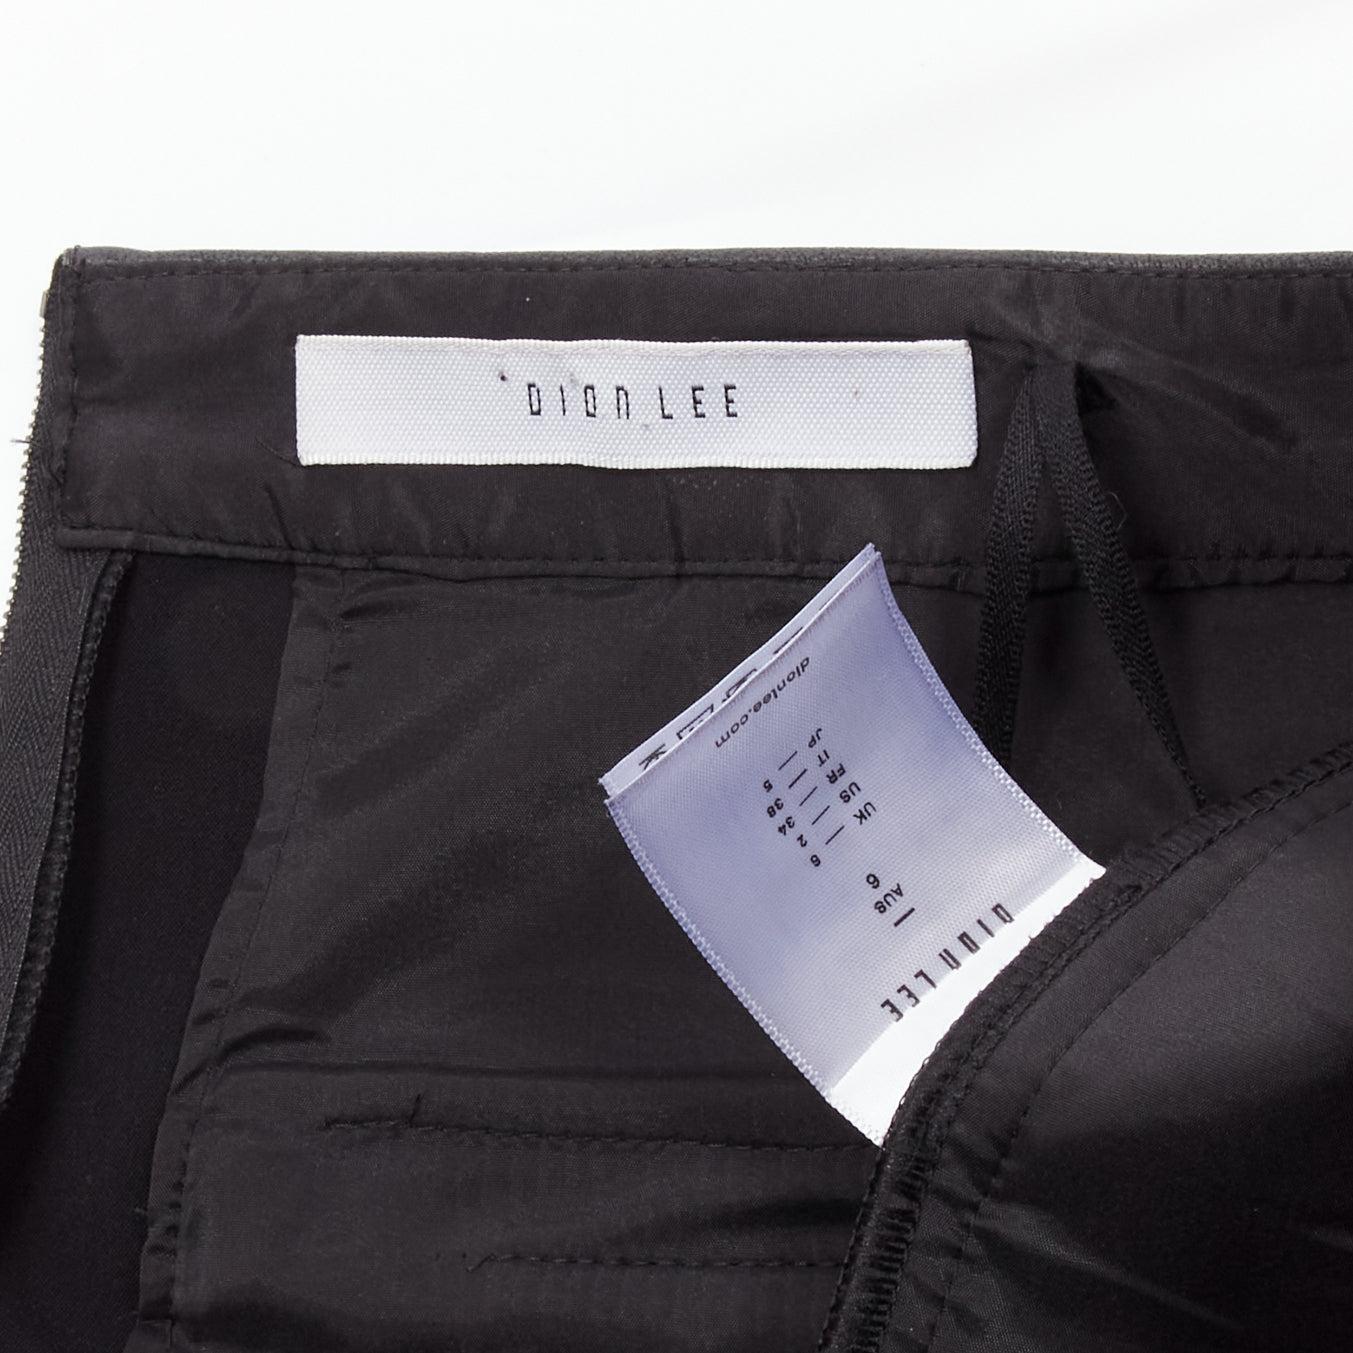 DION LEE black leather waistband wrap detail cropped pants trousers UK6 XS For Sale 3